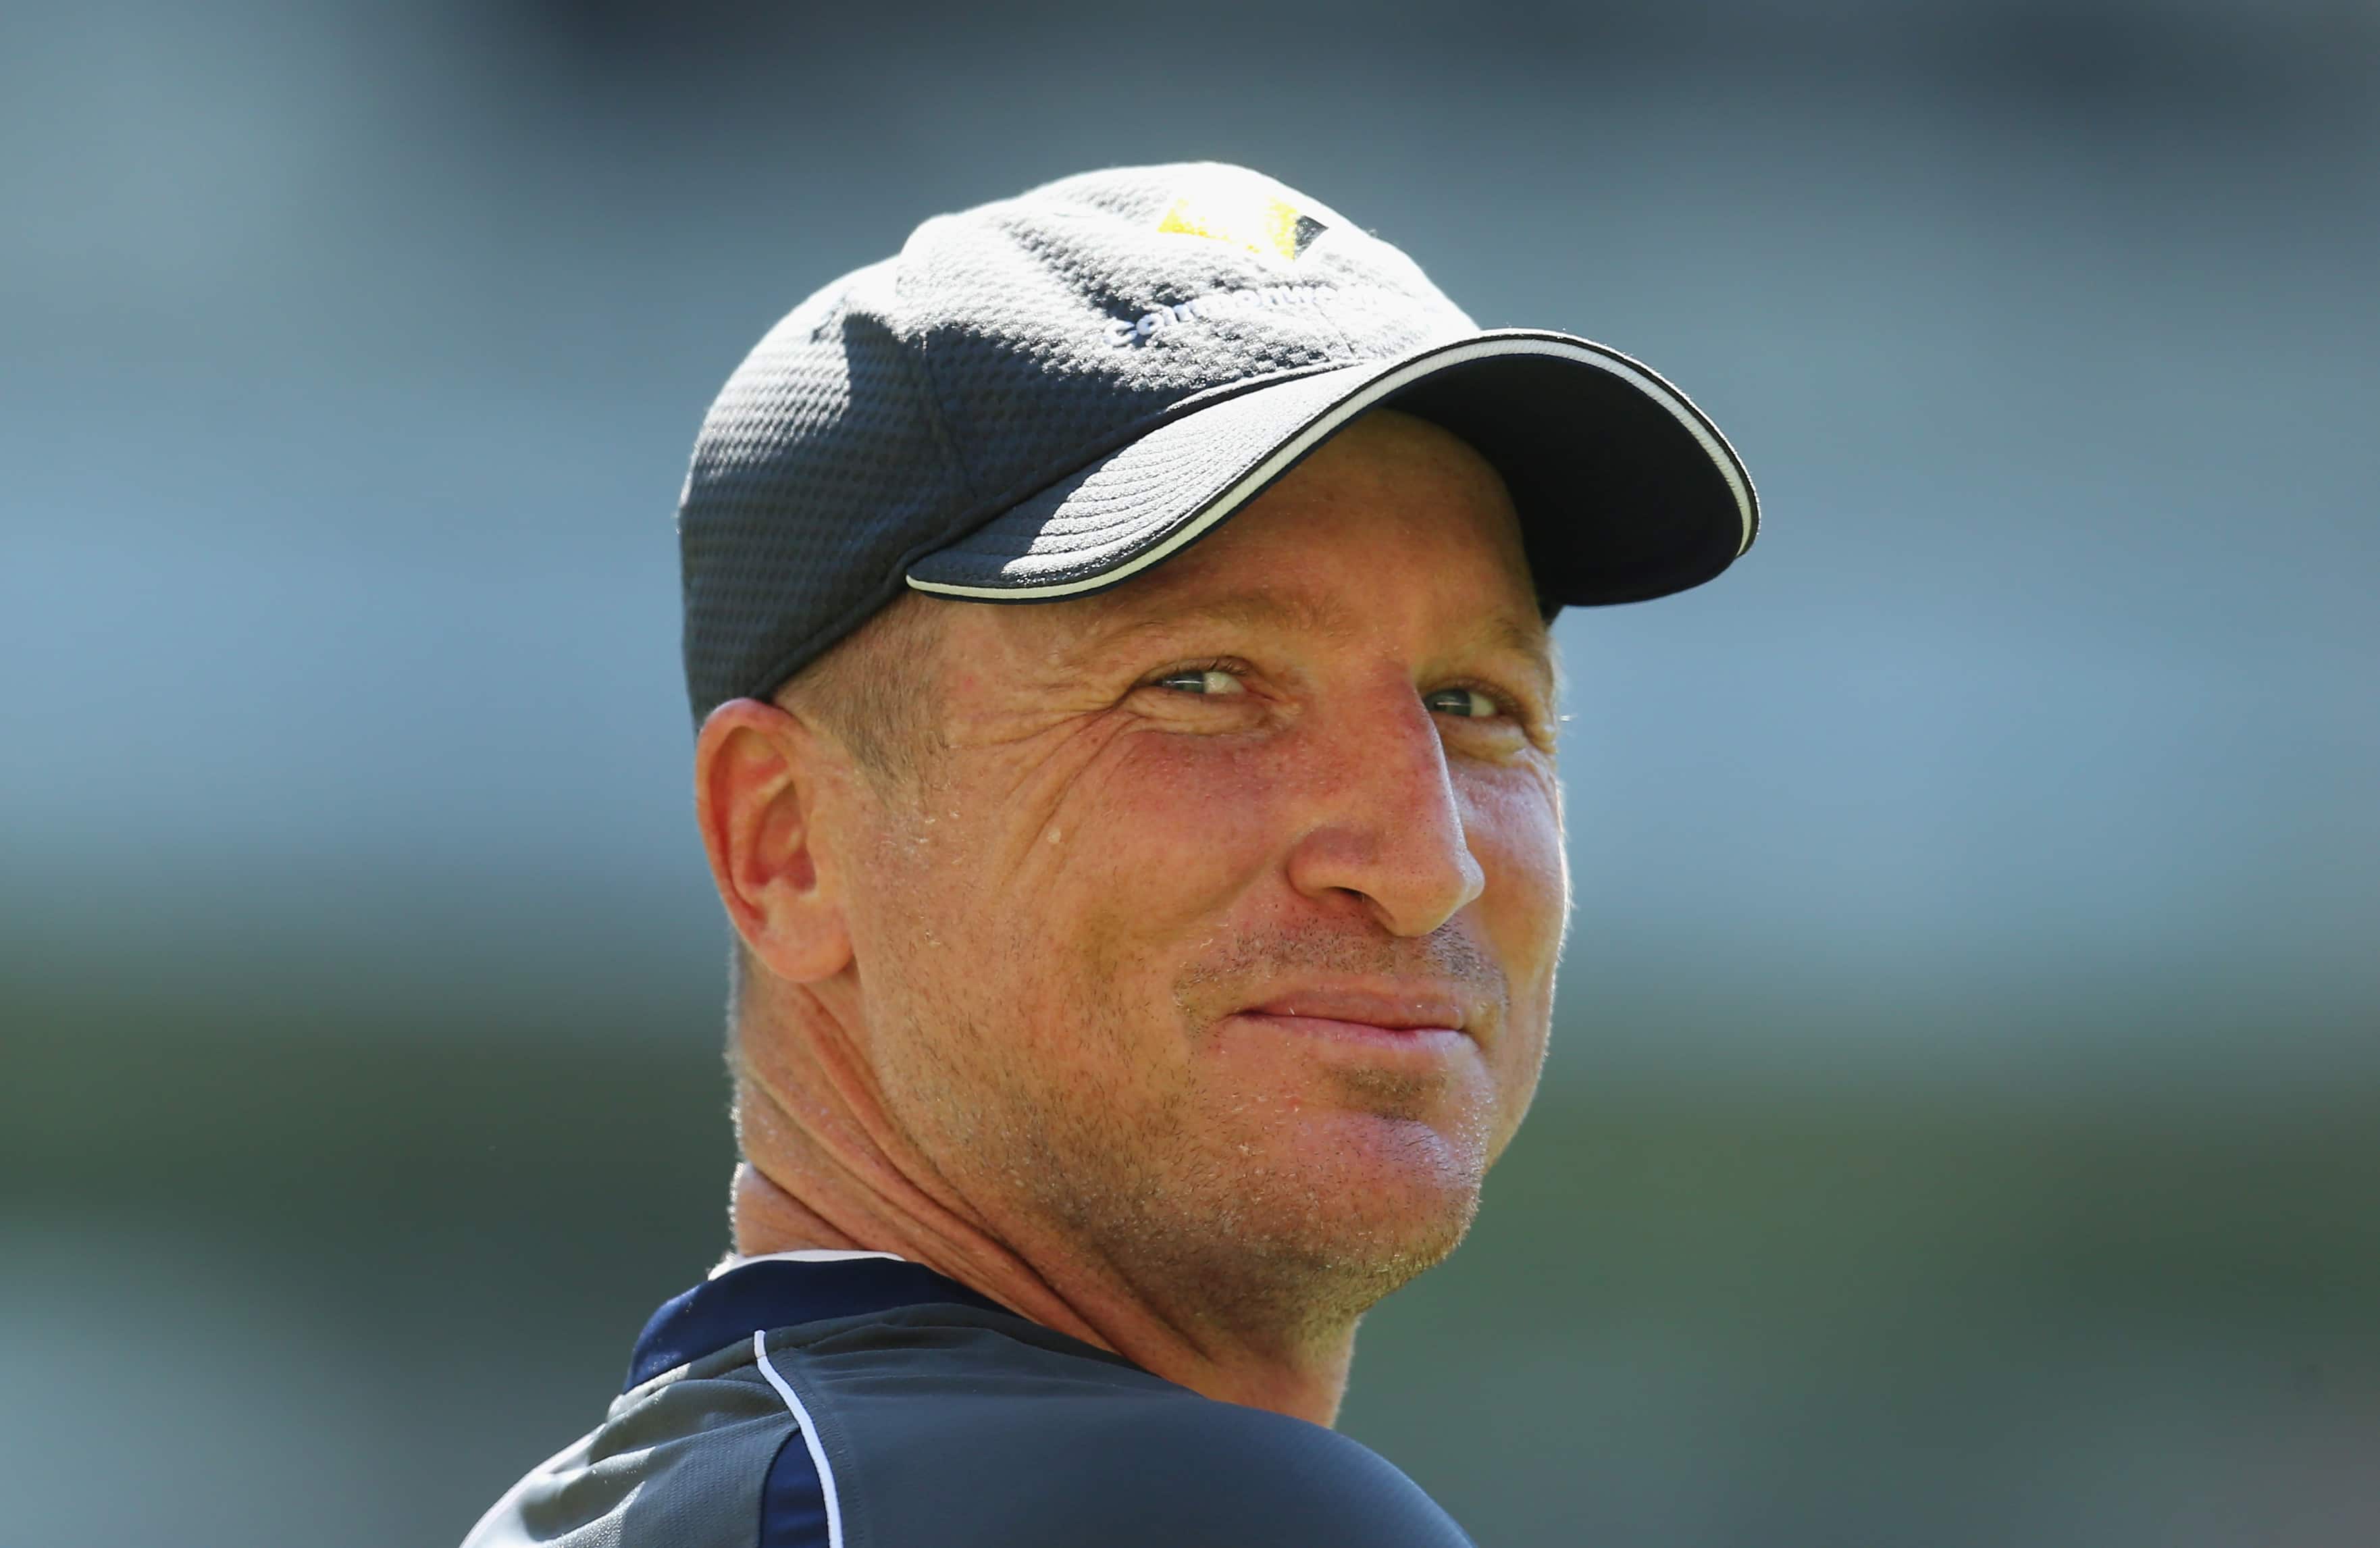 Brad Haddin press conference - Latest Cricket News, Articles &amp; Videos at CricketCountry.com - Brad-Haddin-of-Australia-looks-on-during-an-Australian-cricket-team-training-session-at-the-Melbourne1